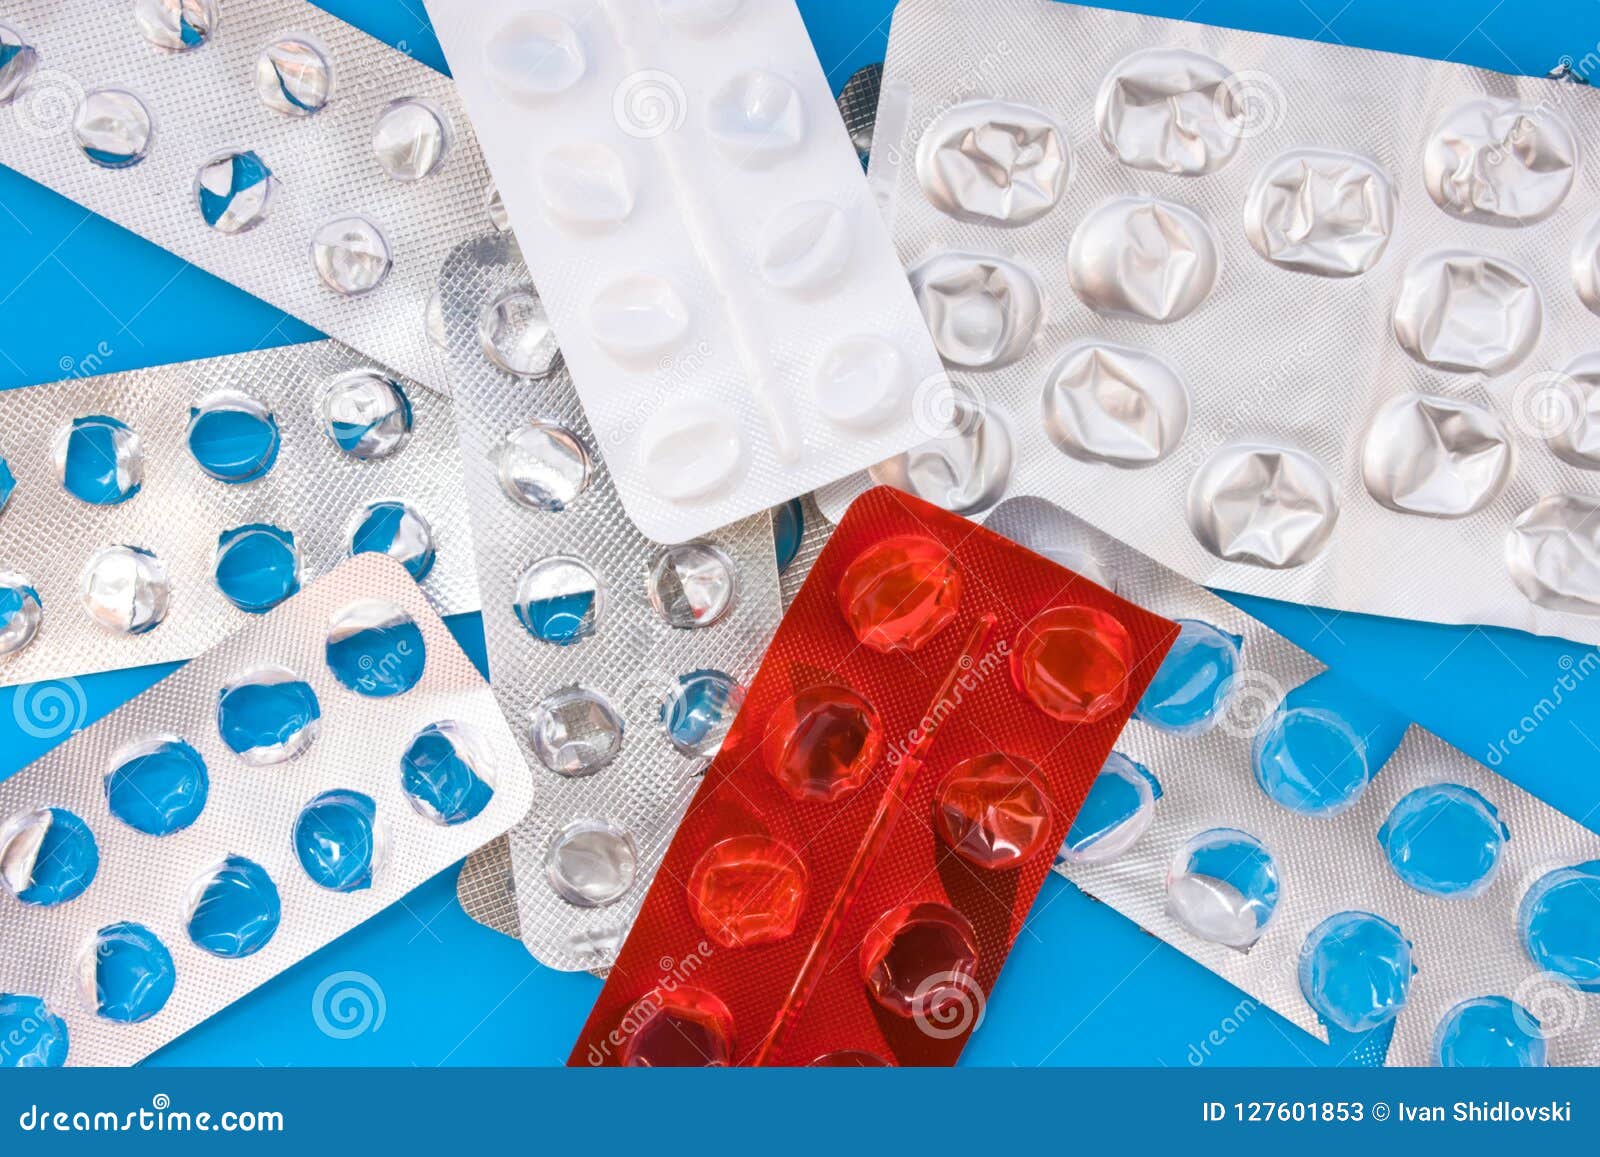 a lot of empty plastic blister packaging of pharmaceutical tablets and pills on blue background. concept of end of treatment, the